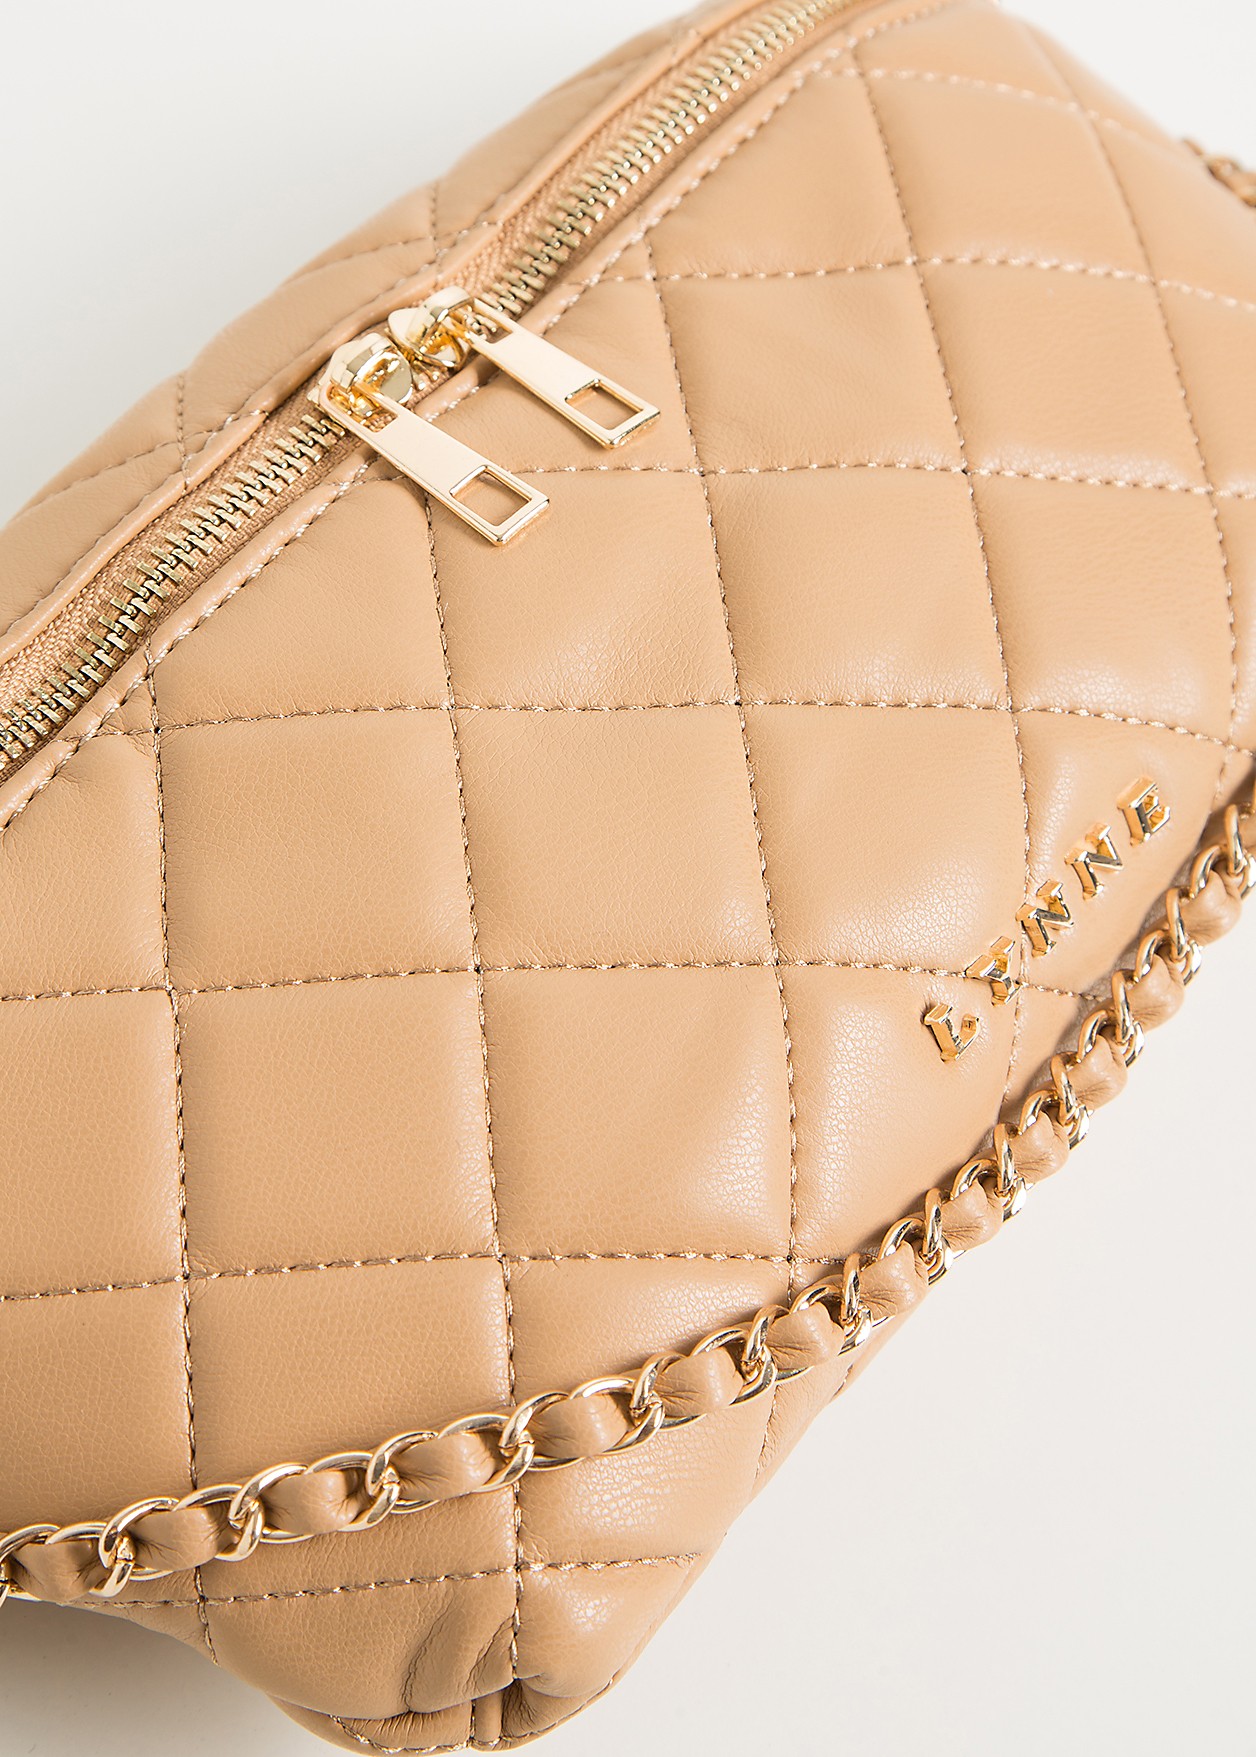 Cross body quilted bag